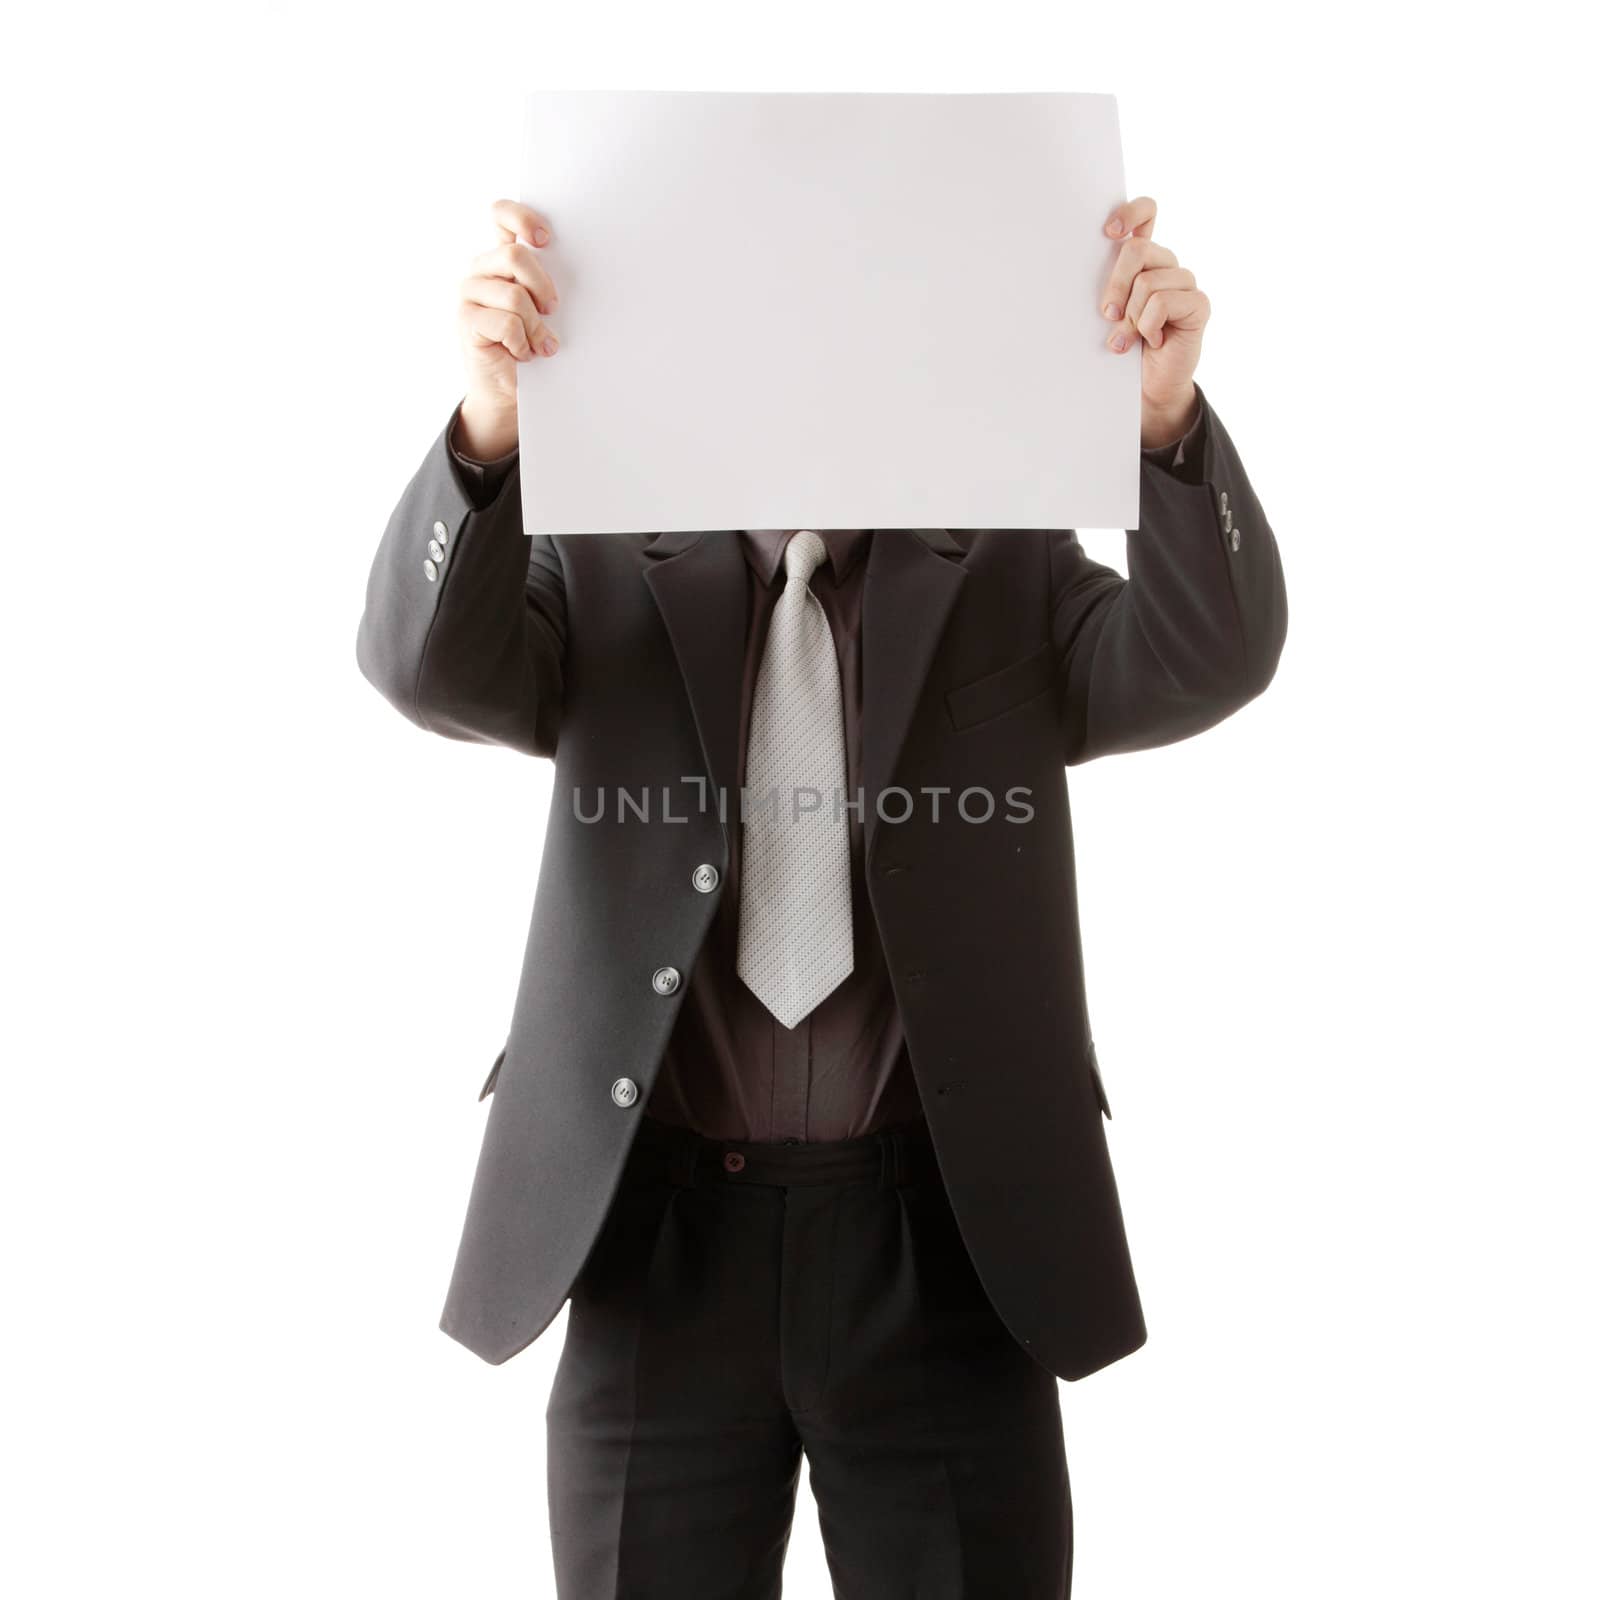 Young businessman holds blank signs. It is isolated on a white background